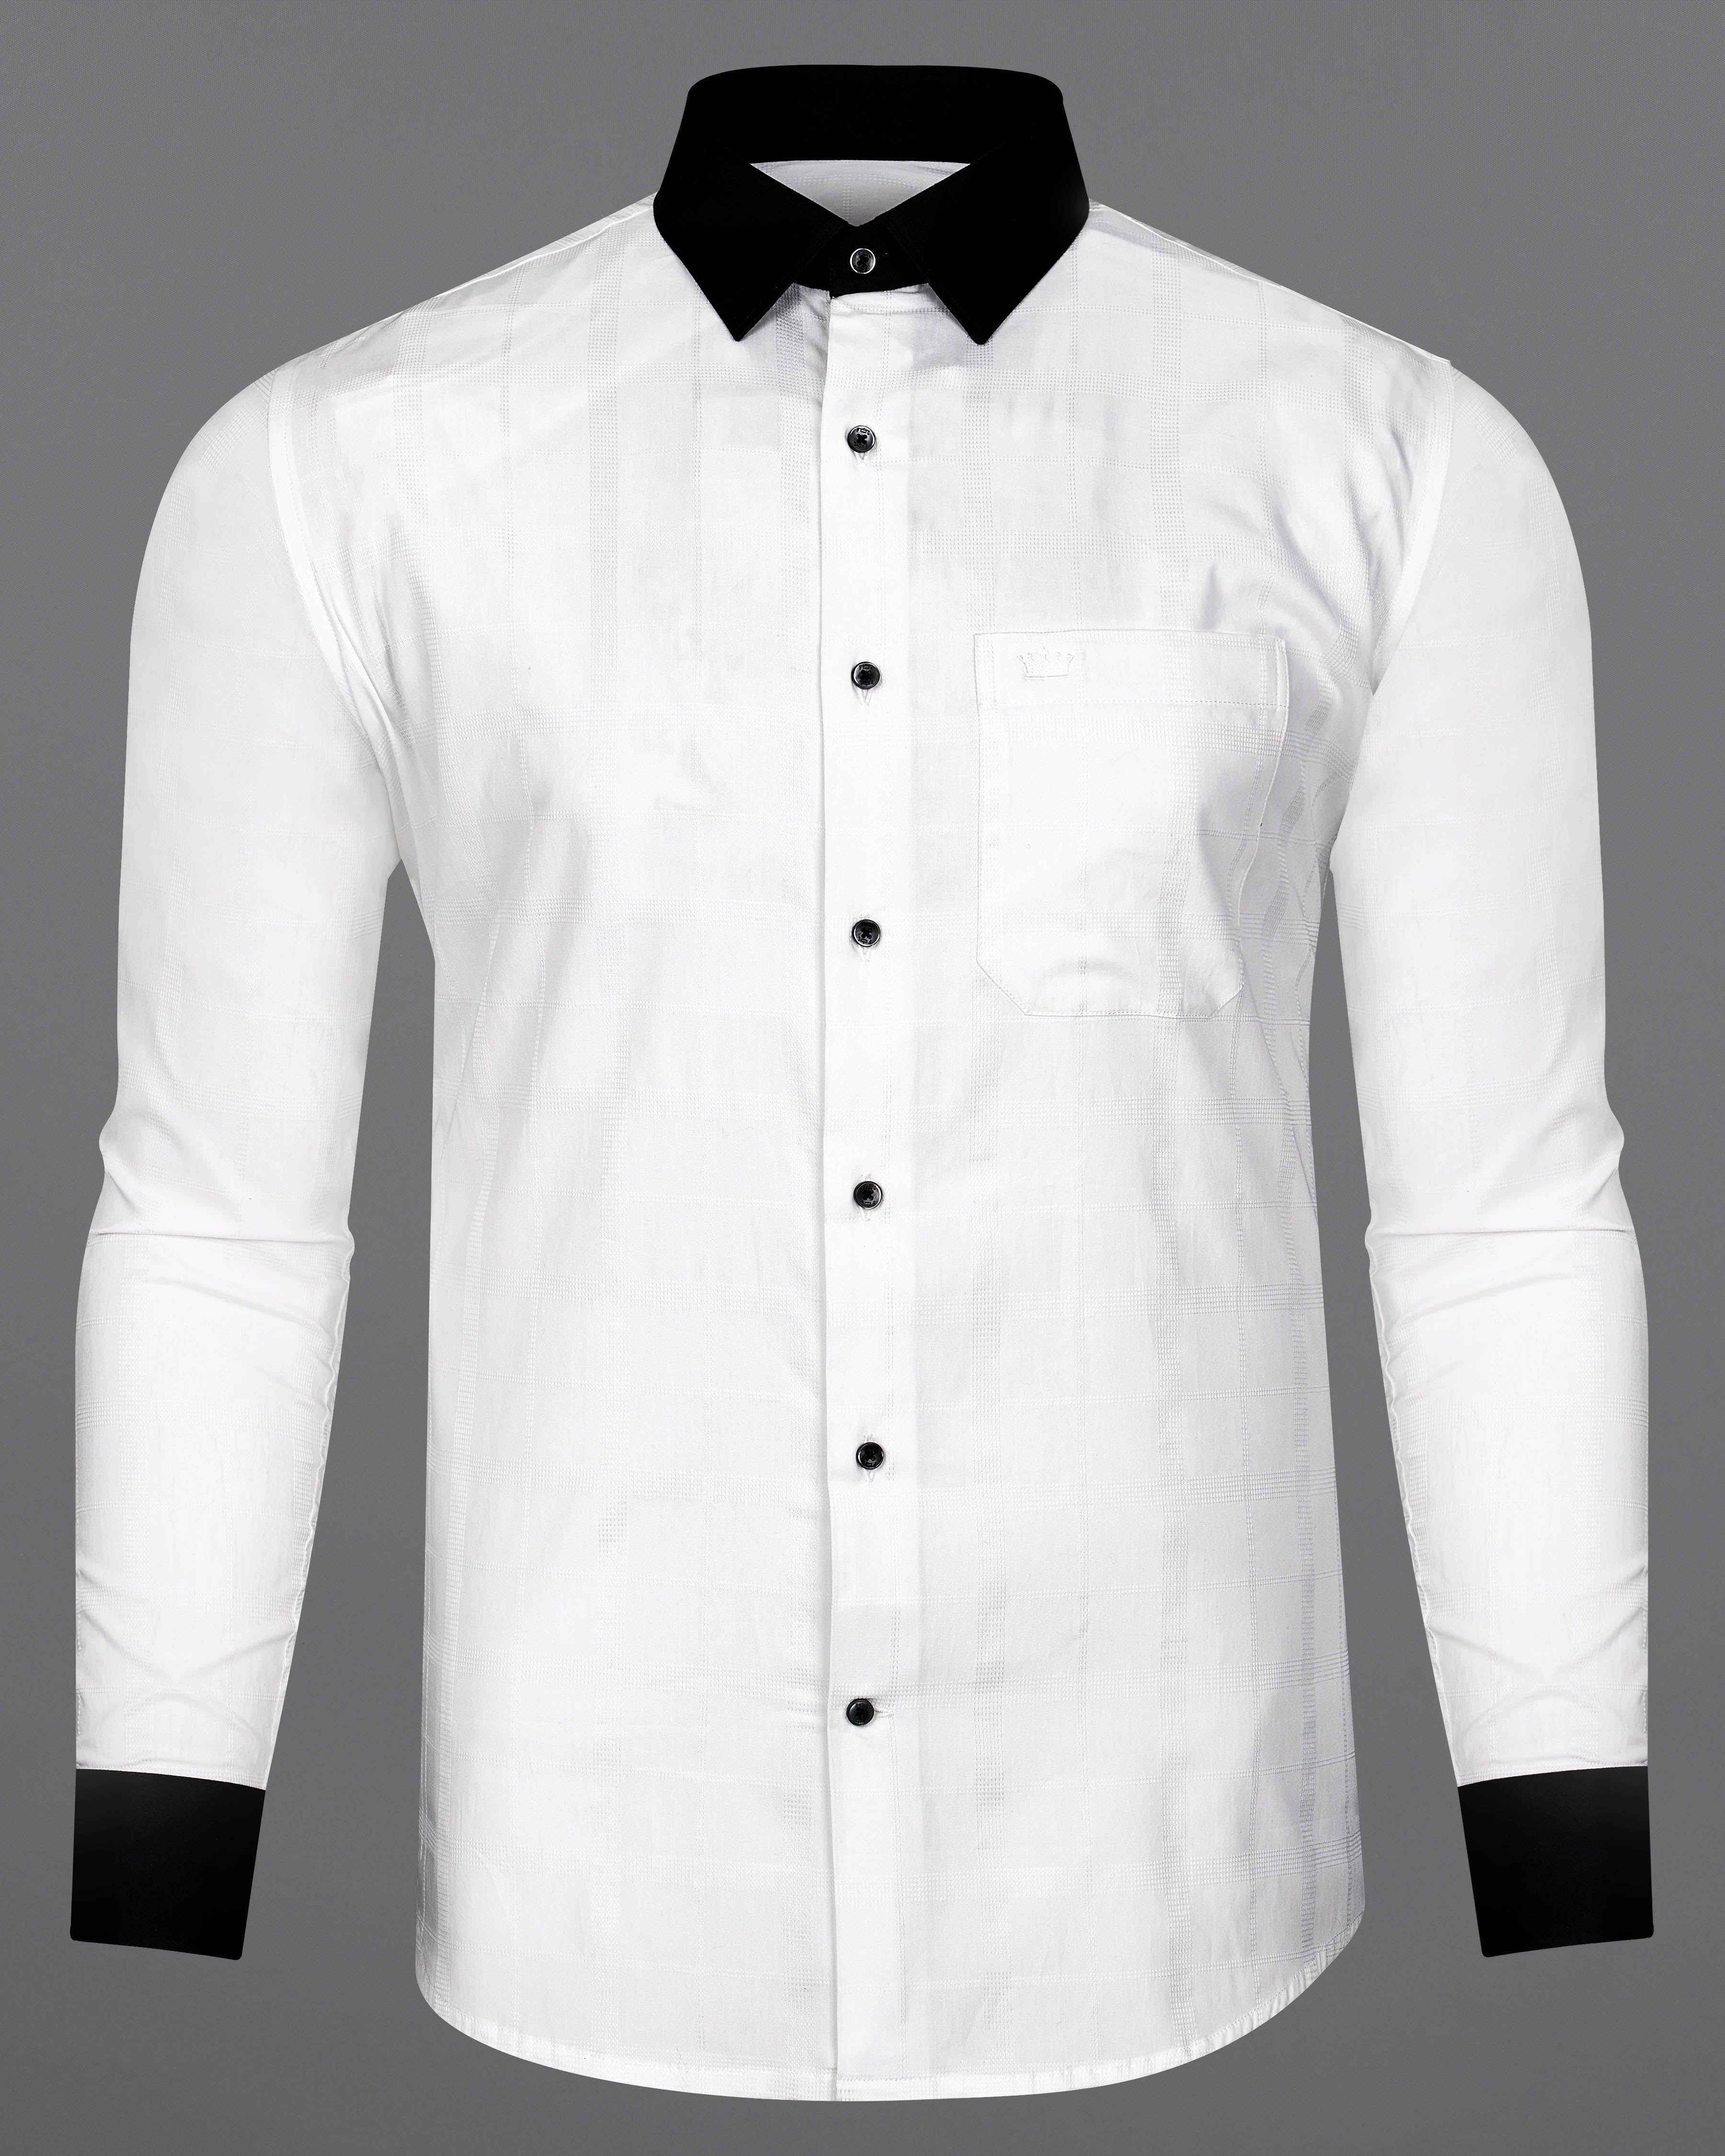 Bright White with Black Cuffs and Collar Dobby Textured Premium Giza Cotton Shirt 8977-BCC-BLK-38, 8977-BCC-BLK-H-38, 8977-BCC-BLK-39, 8977-BCC-BLK-H-39, 8977-BCC-BLK-40, 8977-BCC-BLK-H-40, 8977-BCC-BLK-42, 8977-BCC-BLK-H-42, 8977-BCC-BLK-44, 8977-BCC-BLK-H-44, 8977-BCC-BLK-46, 8977-BCC-BLK-H-46, 8977-BCC-BLK-48, 8977-BCC-BLK-H-48, 8977-BCC-BLK-50, 8977-BCC-BLK-H-50, 8977-BCC-BLK-52, 8977-BCC-BLK-H-52